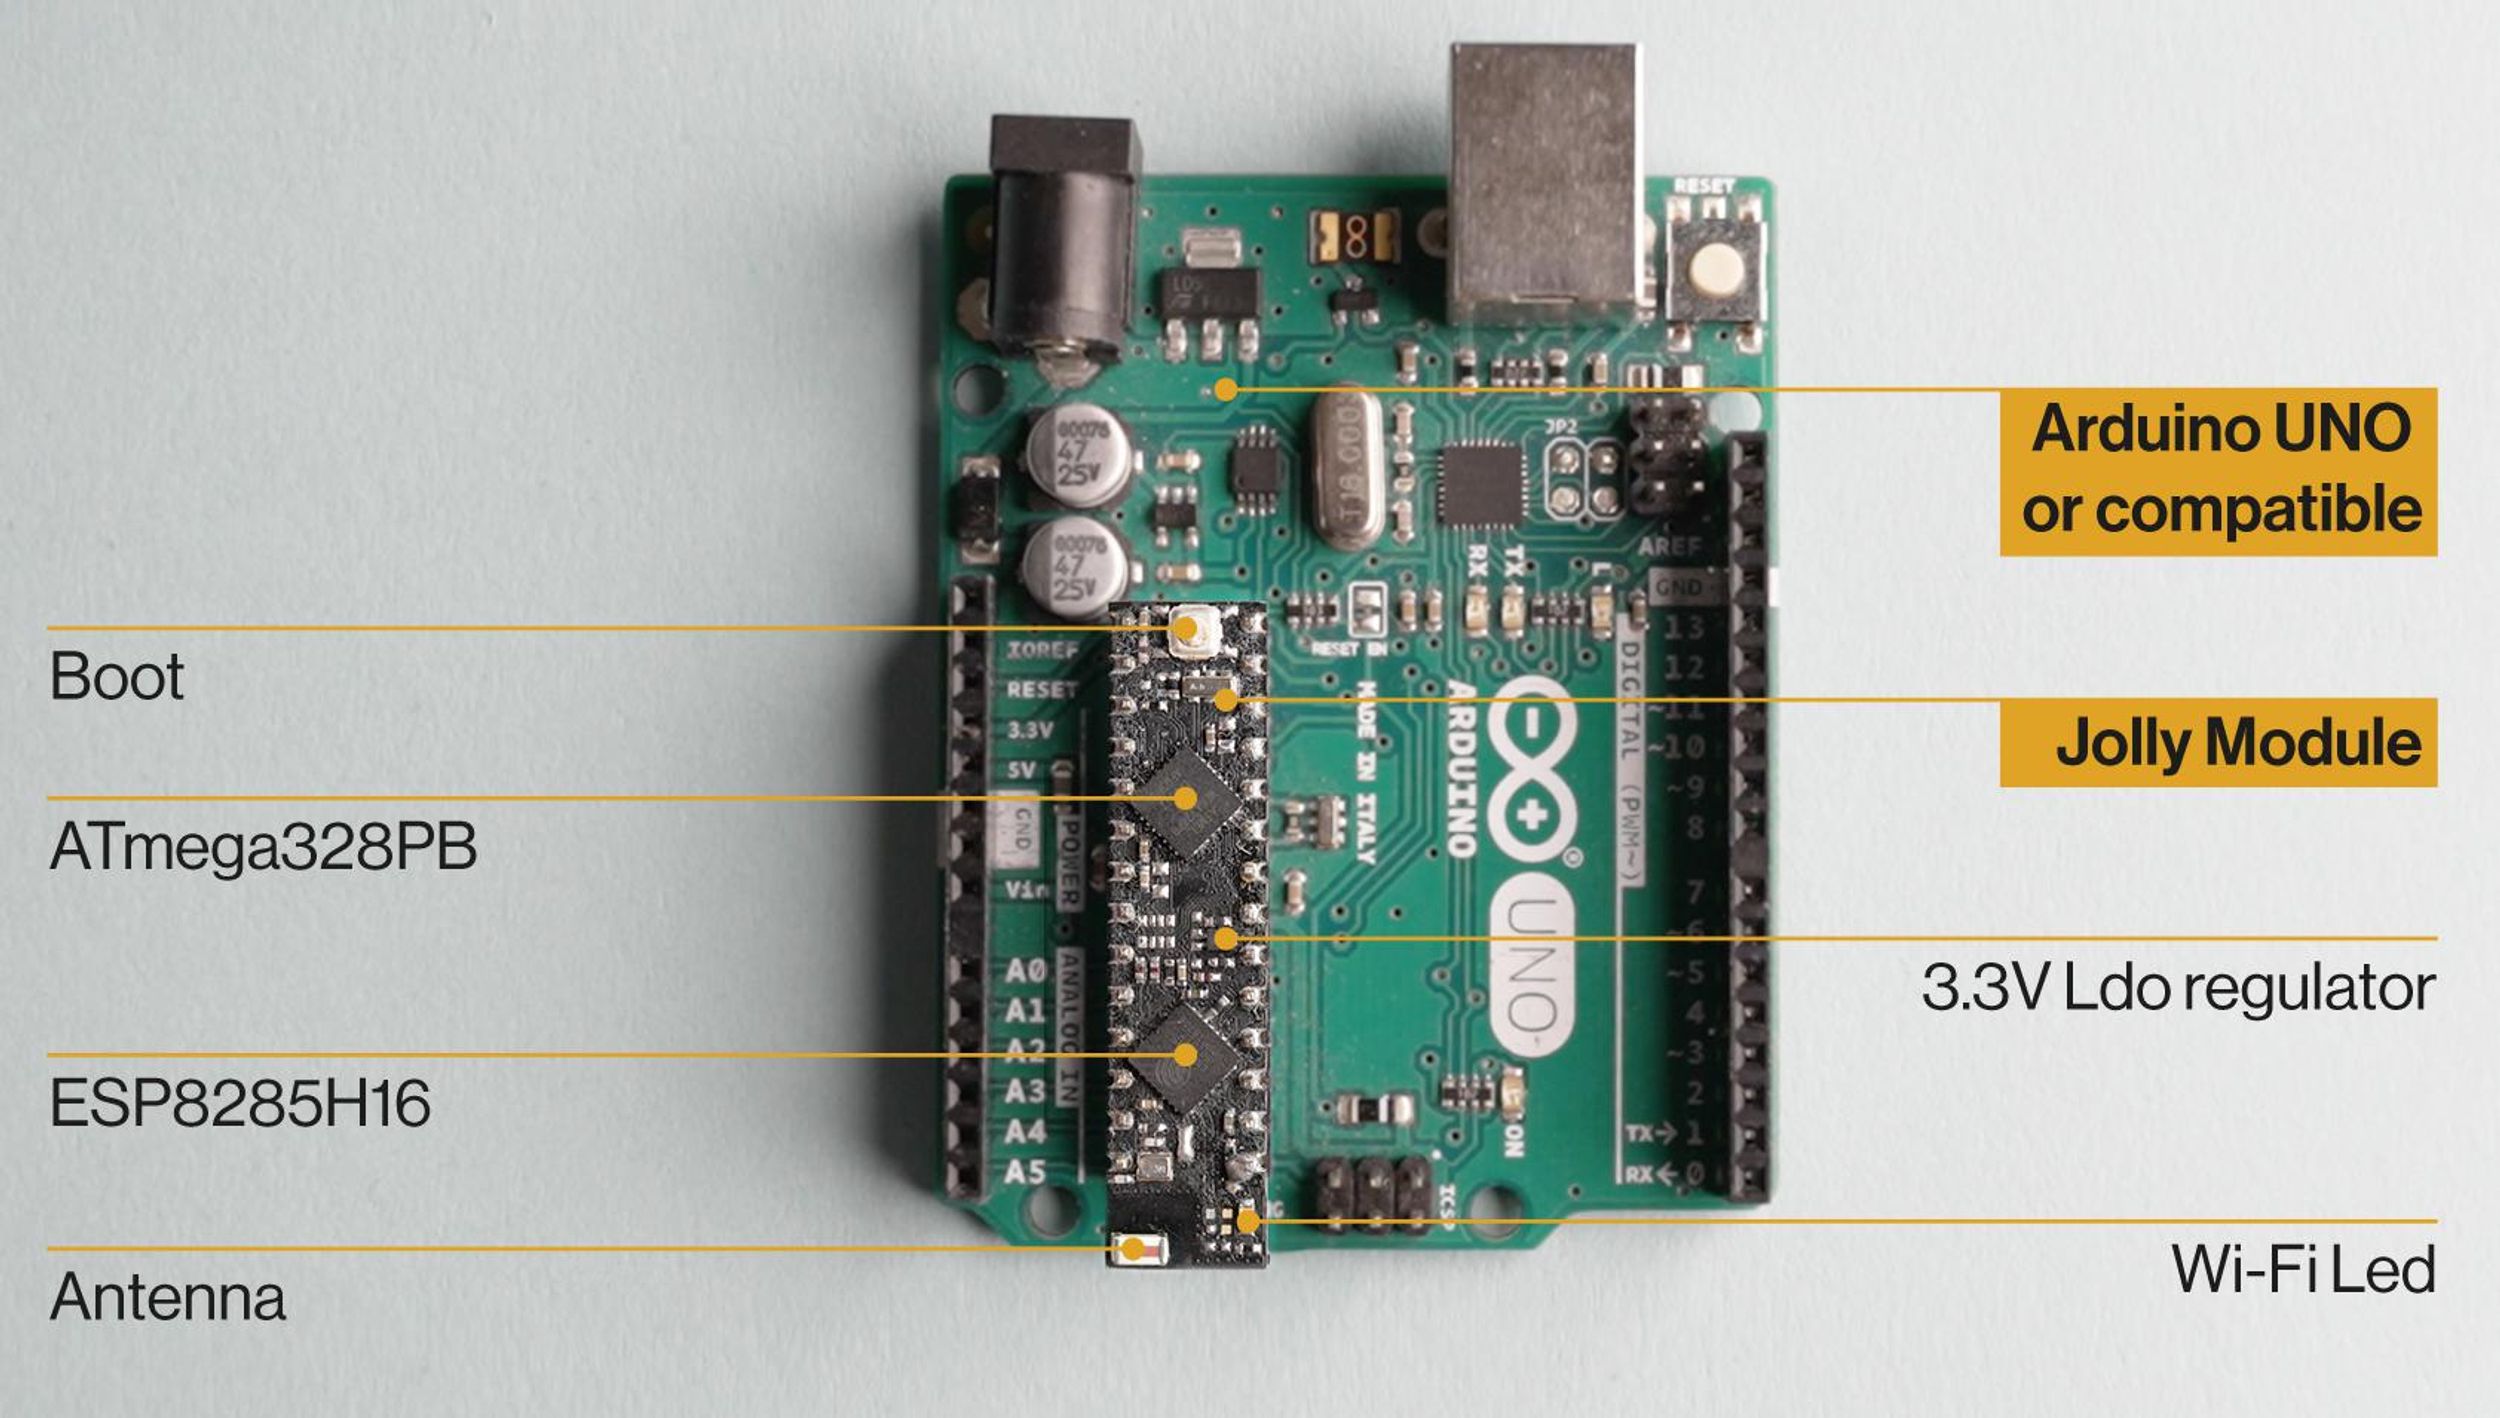 An annotated image of an Arduino micrcontrontroller, with a Jolly module in place. An ATmeg328PB and ESP8285H16 are surface mounted on the module at a 45 degree angle to the rest of the board, and small antenna is located at the bottom of the module.